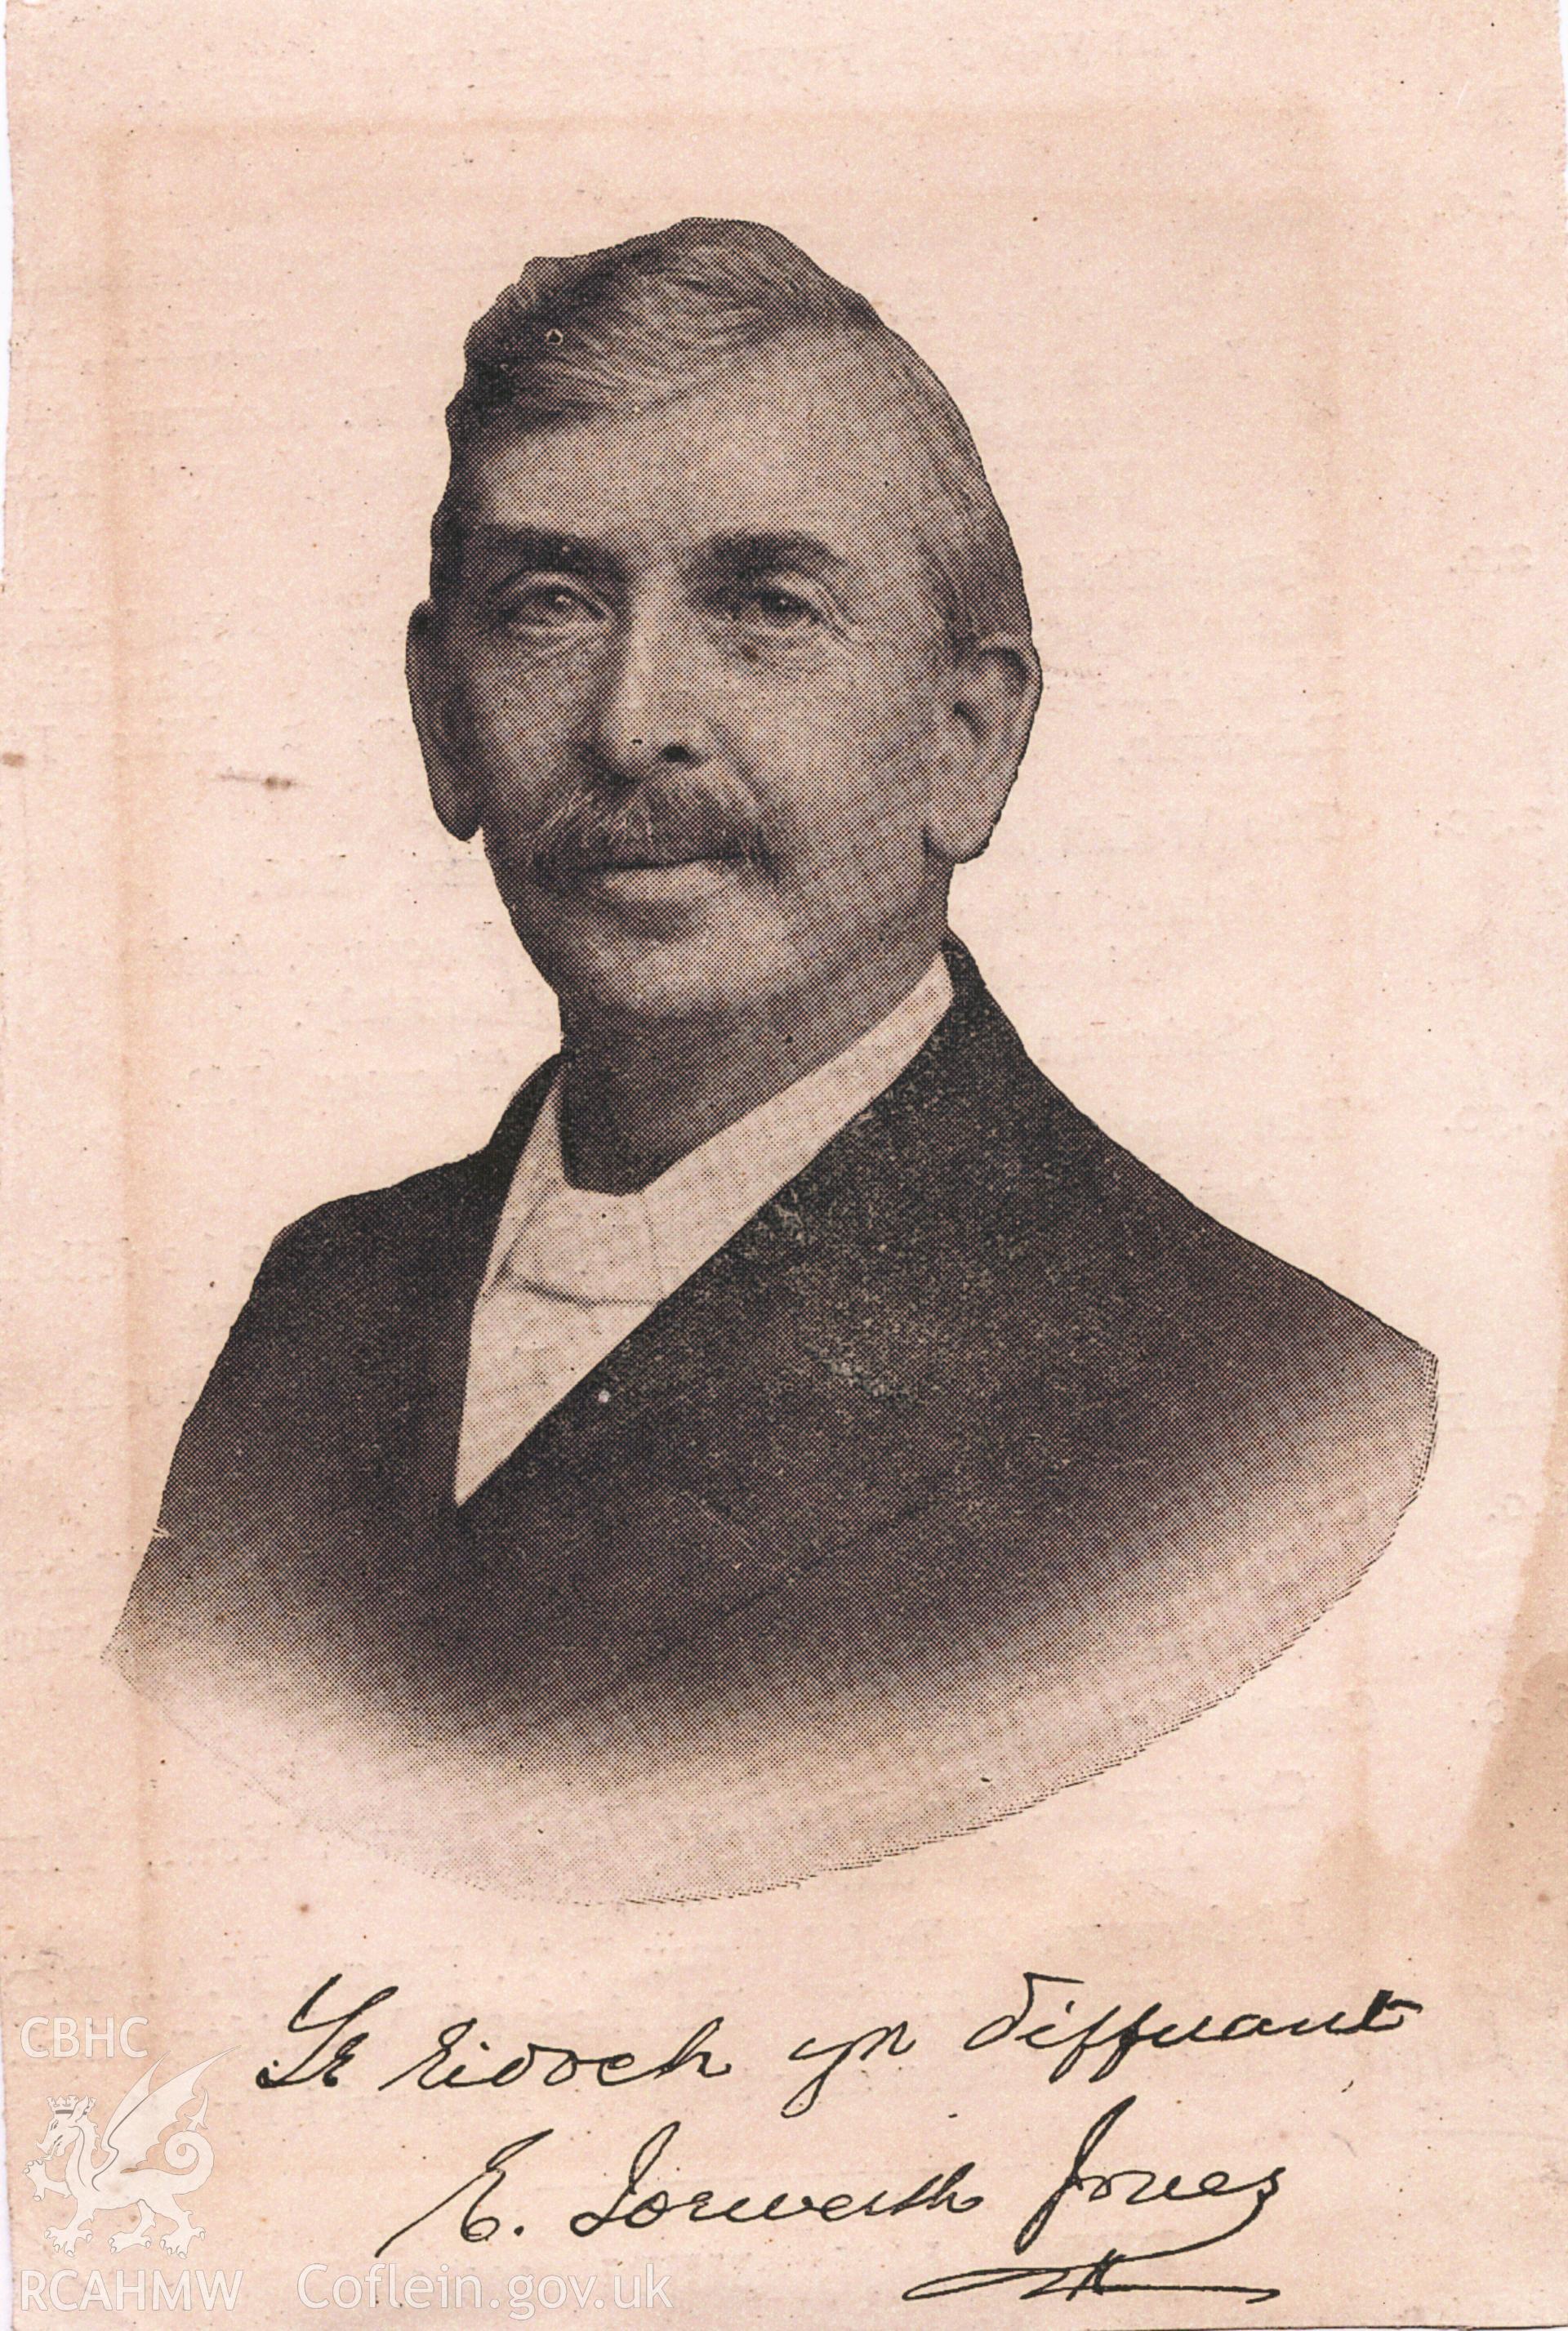 Black and white photograph of E. Iorwerth Jones. Donated to the RCAHMW by Enyd Carroll as part of the Digital Dissent Project.